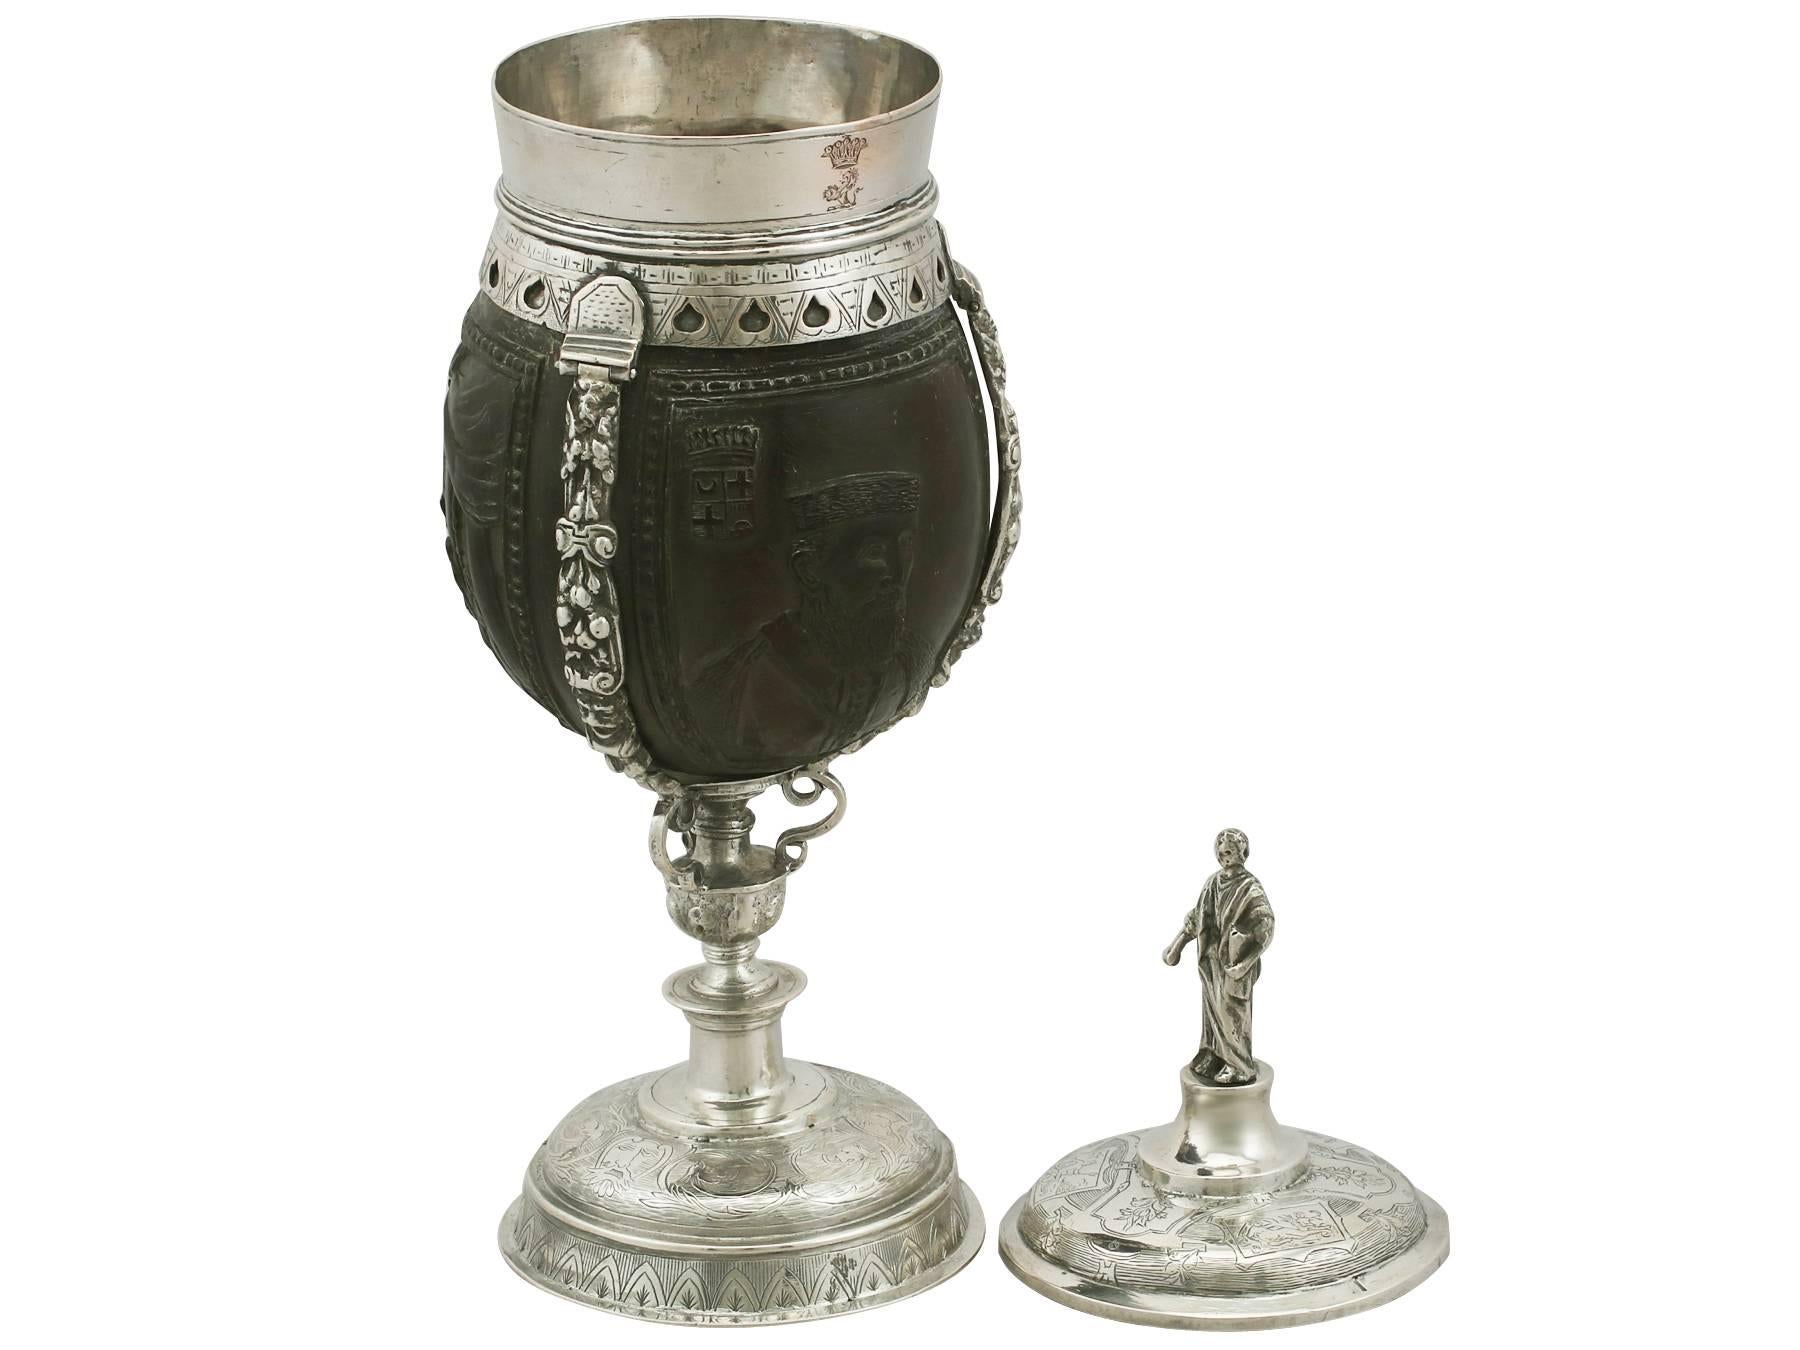 An exceptional, fine and impressive antique continental silver mounted coconut cup; an addition to our diverse ornamental silverware collection

This exceptional antique silver cup has a flared rim and shaped pedestal onto a circular domed